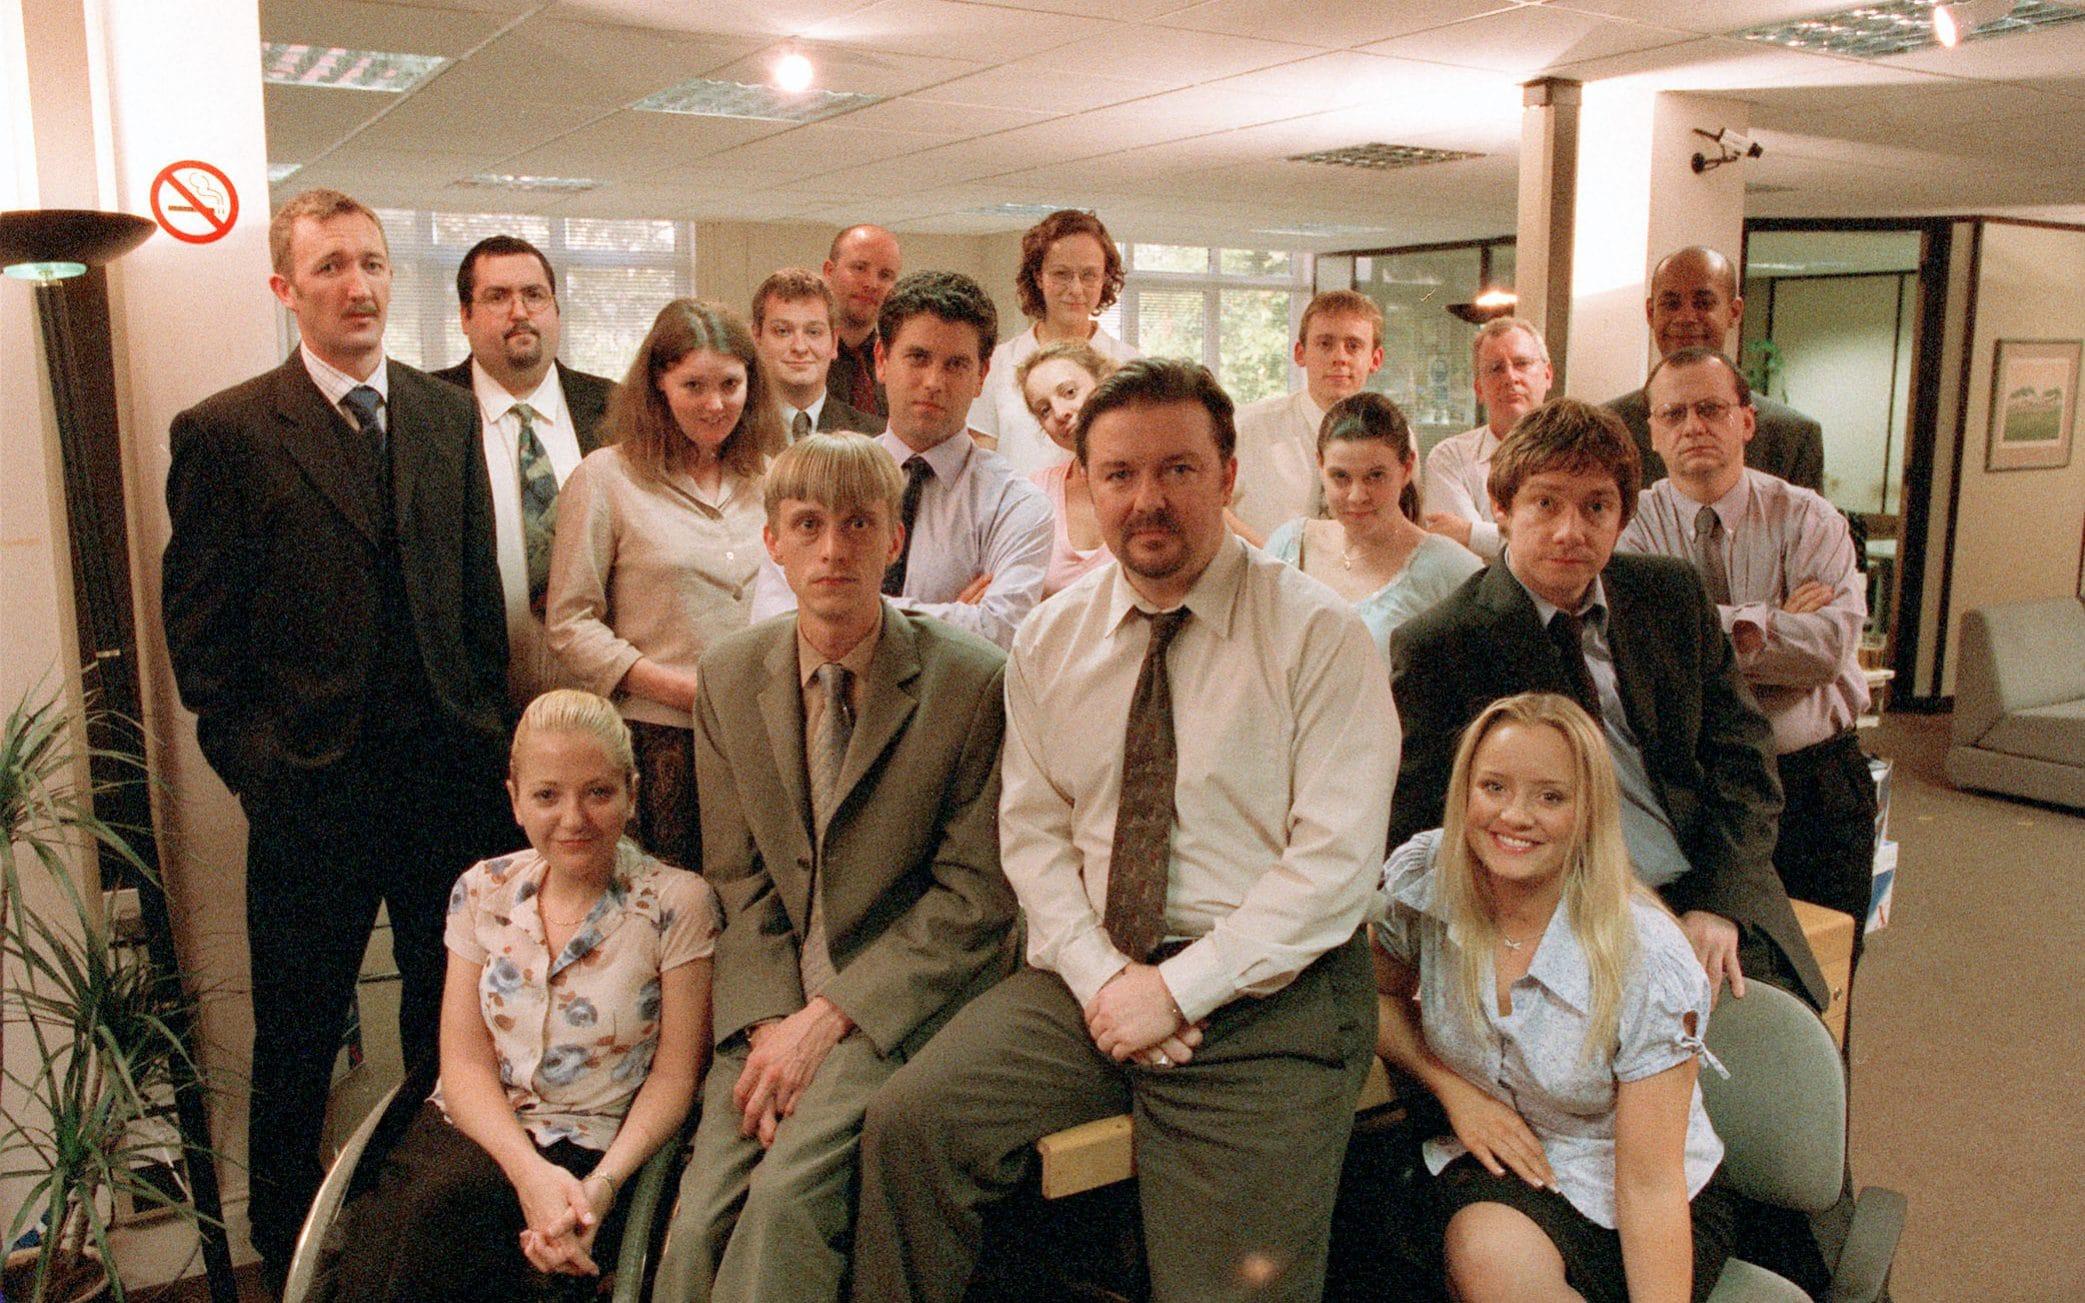 Jon Plowman helped to bring ‘The Office’ (pictured), ‘Absolutely Fabulous’, ‘W1A’ and ‘French and Saunders’ to the screen